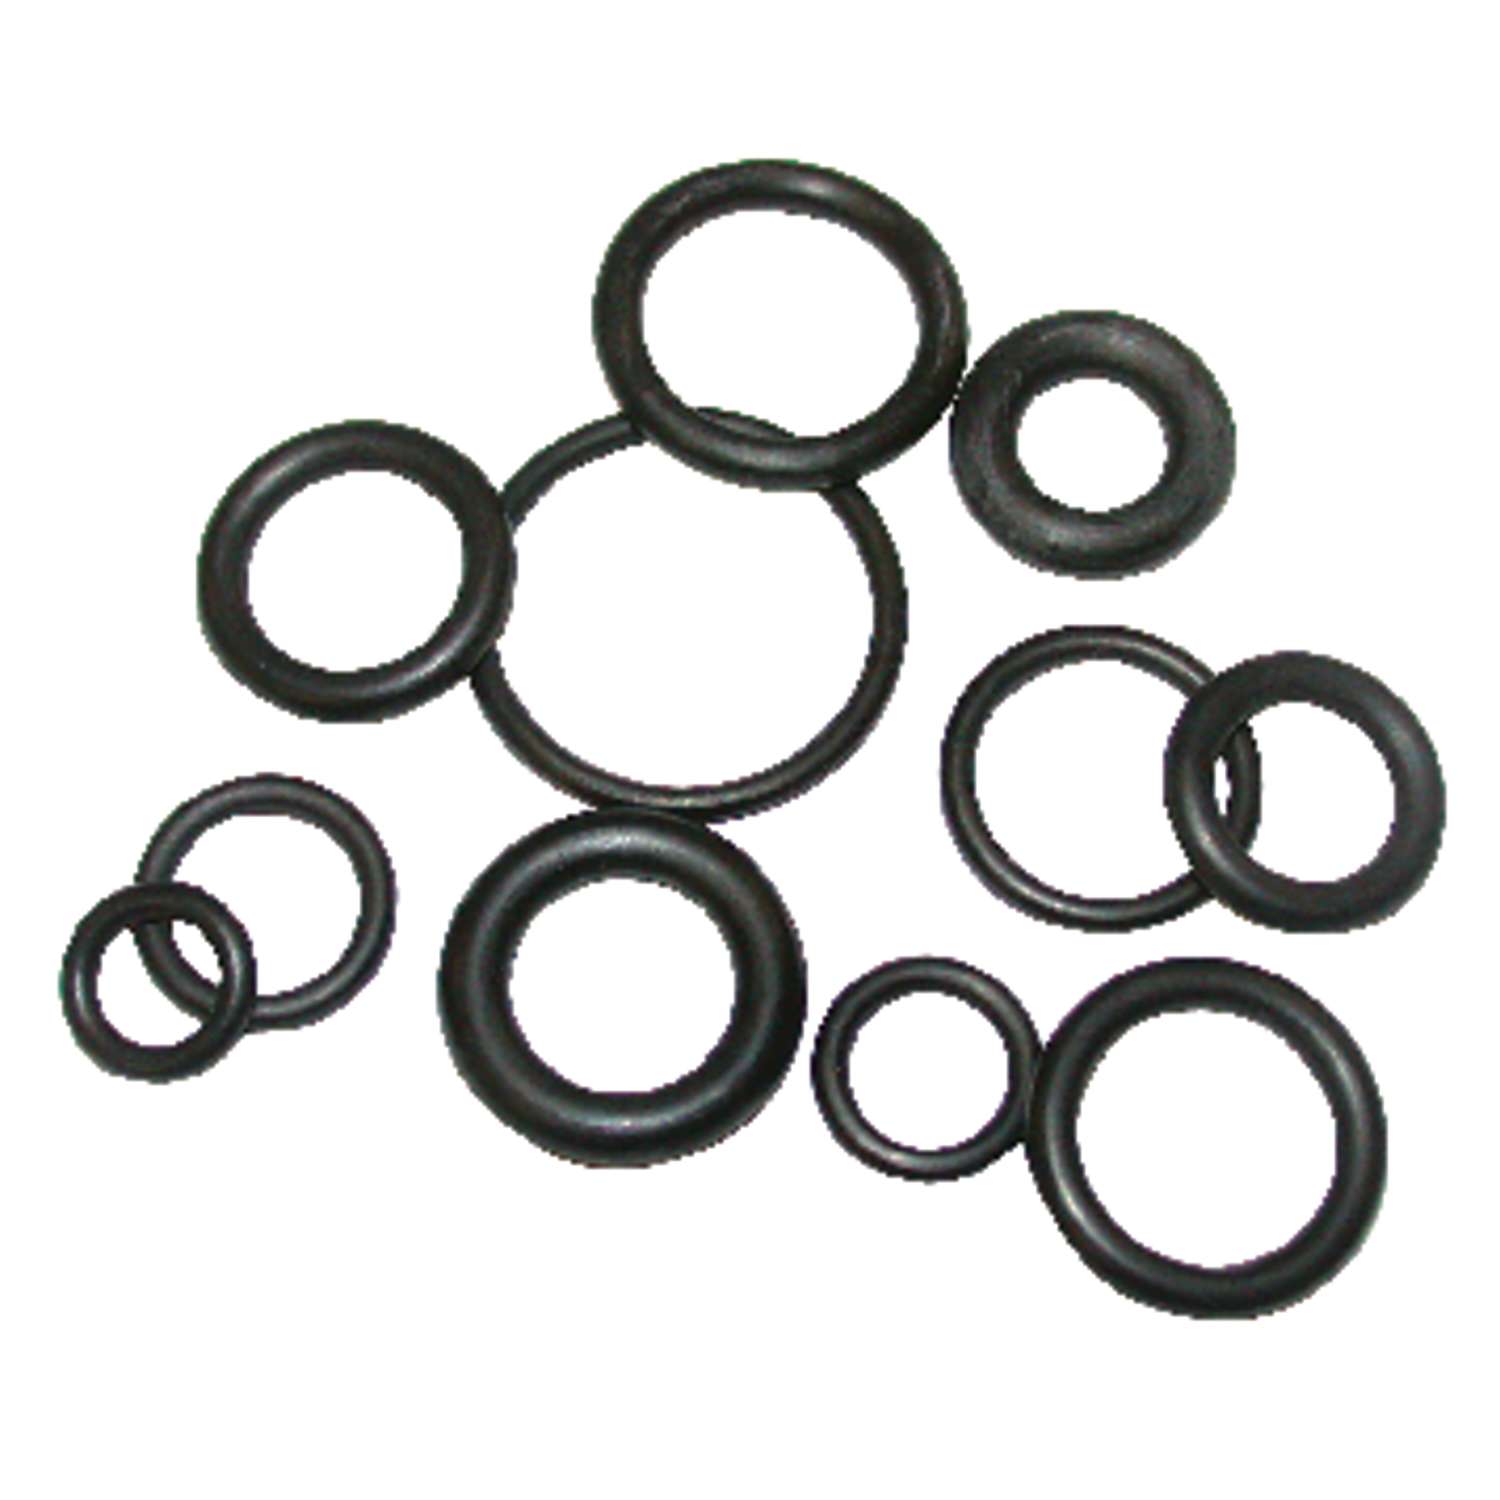 Porter Cable Part # 904752 O-RING OF RUBBER Pack Of 6 